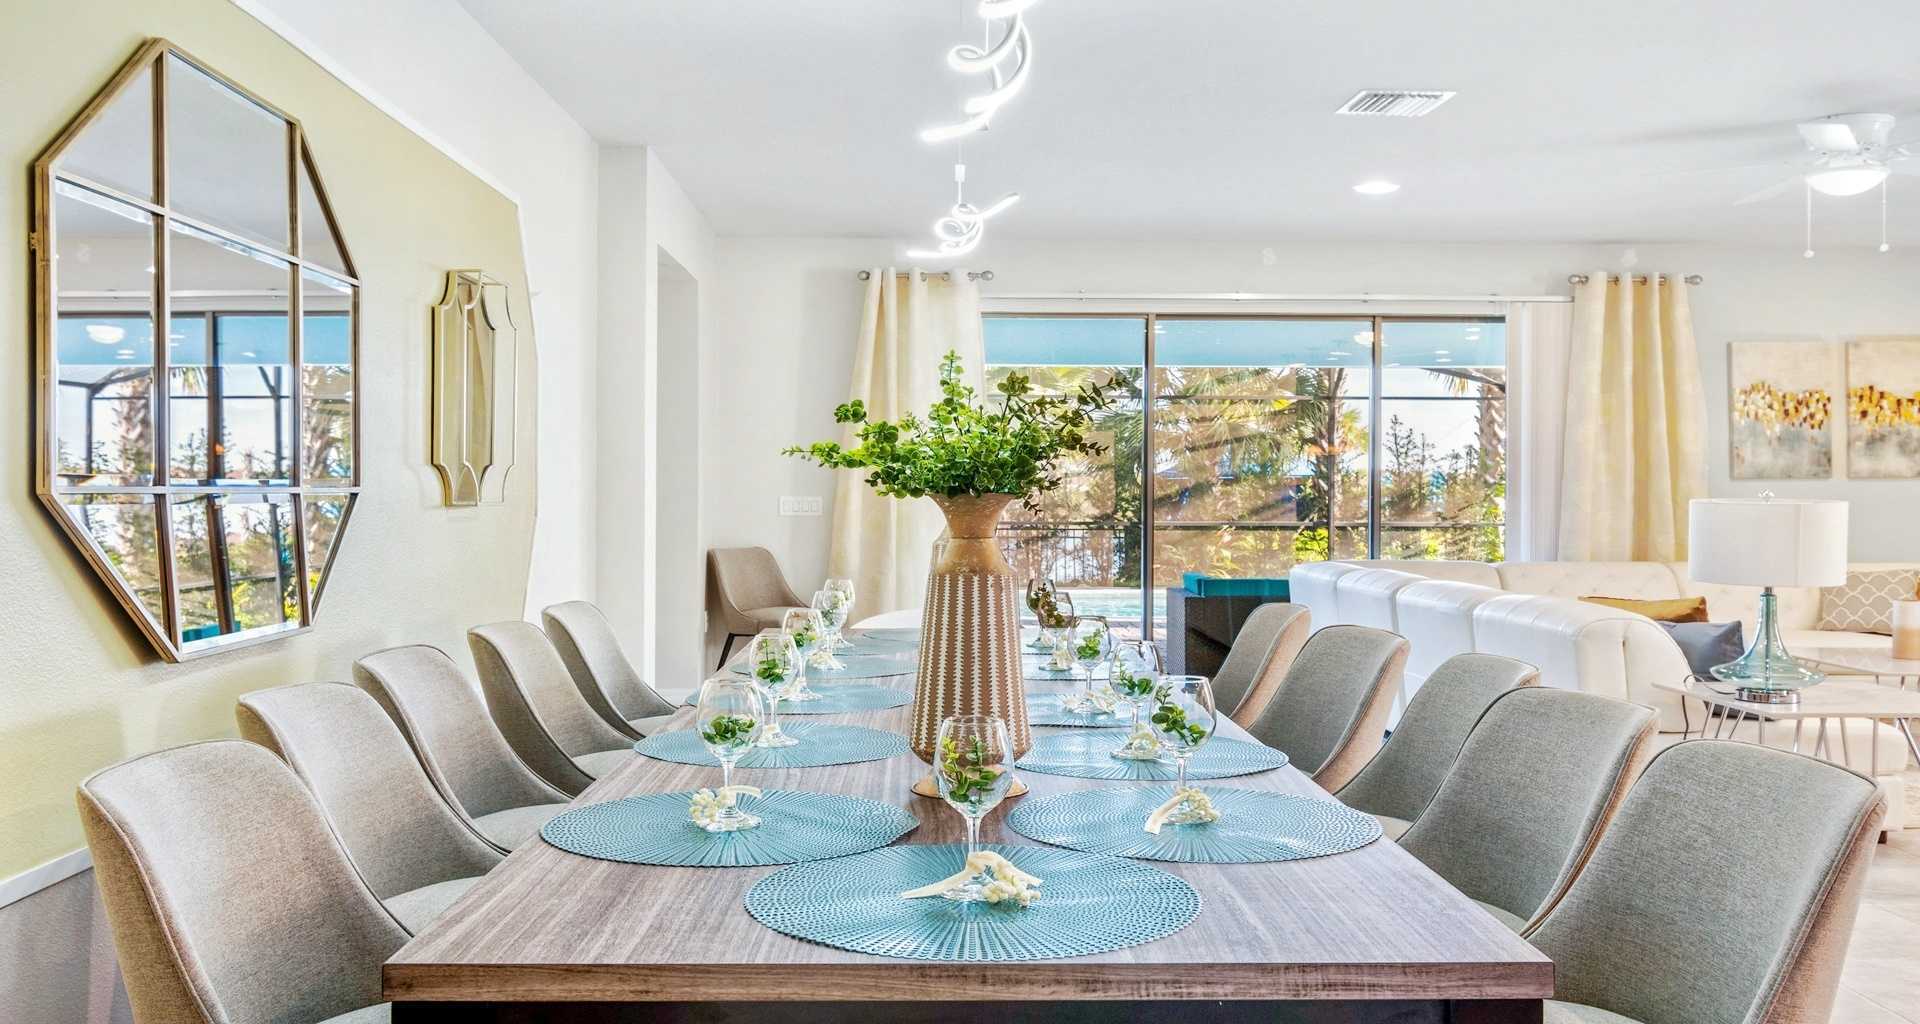 The large dining table is perfect for a family feast